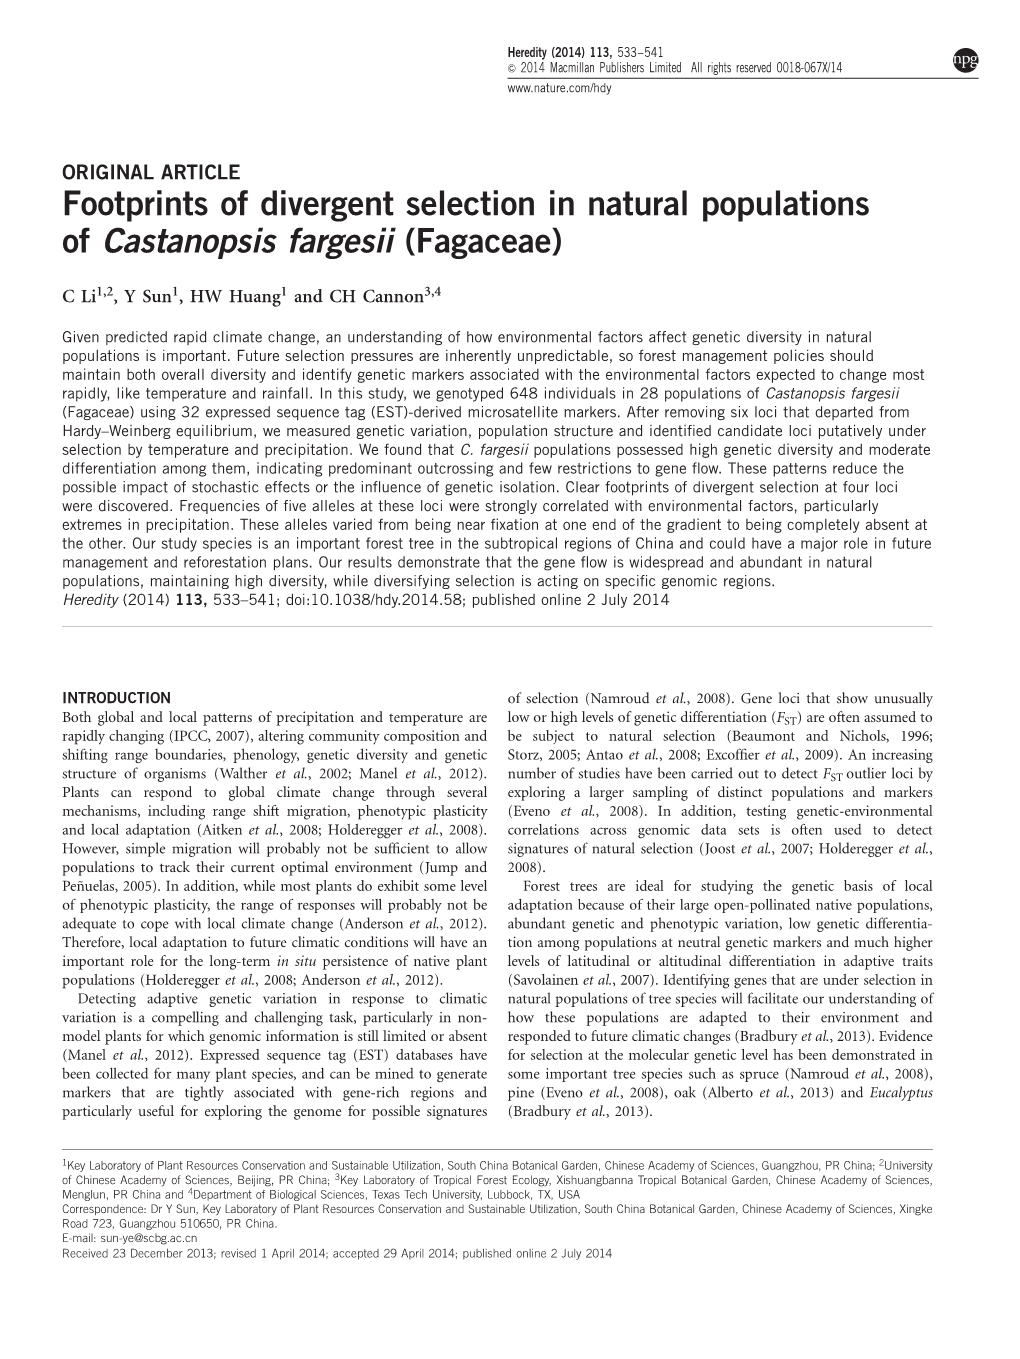 Footprints of Divergent Selection in Natural Populations of Castanopsis Fargesii (Fagaceae)